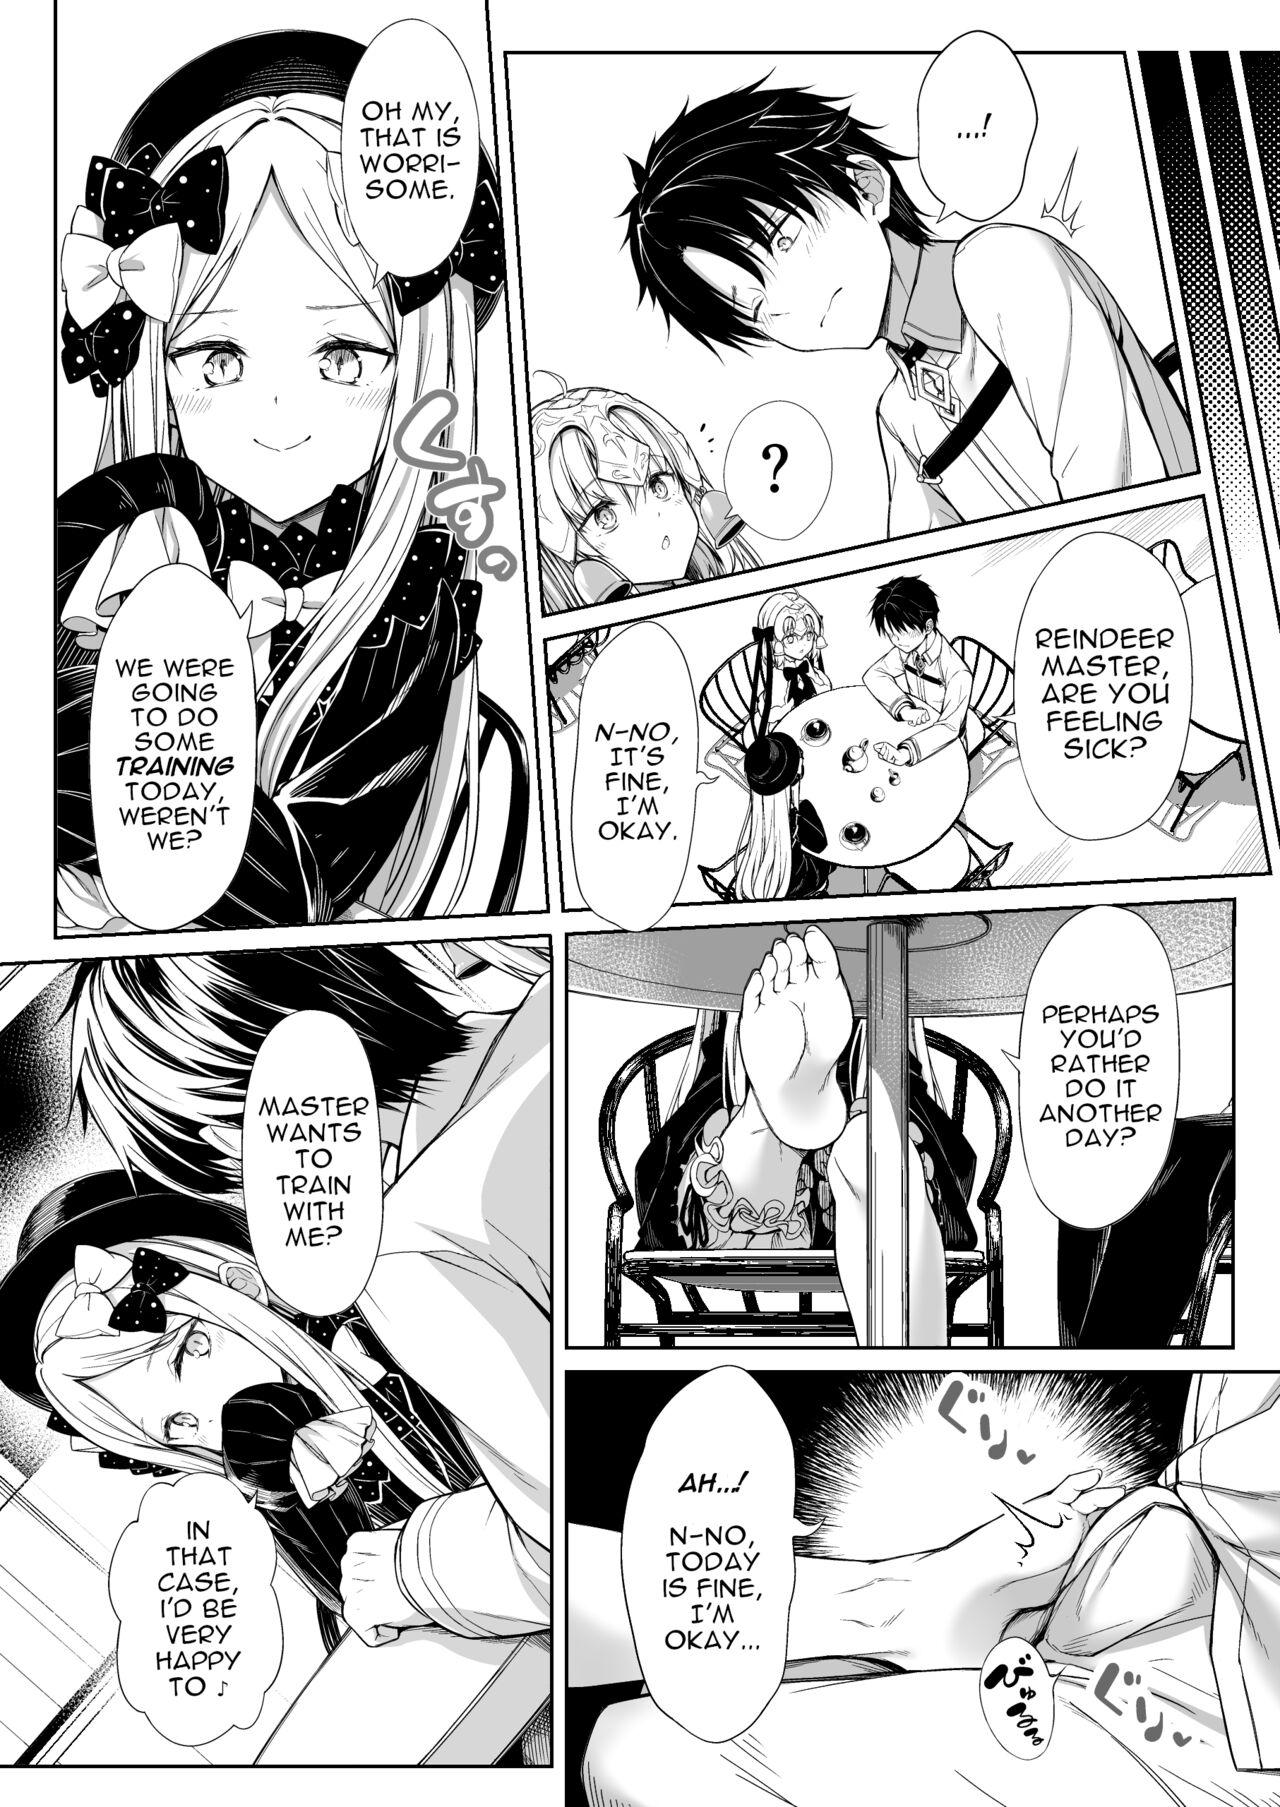 Hot Mom (C99) [FavoriteTrick! (Teruwi)] Abby-chan ni Onaho Mitsukaru hon | Abby-chan Found my Onahole (Fate/Grand Order) [English] [ShinyTL] - Fate grand order Juggs - Page 9